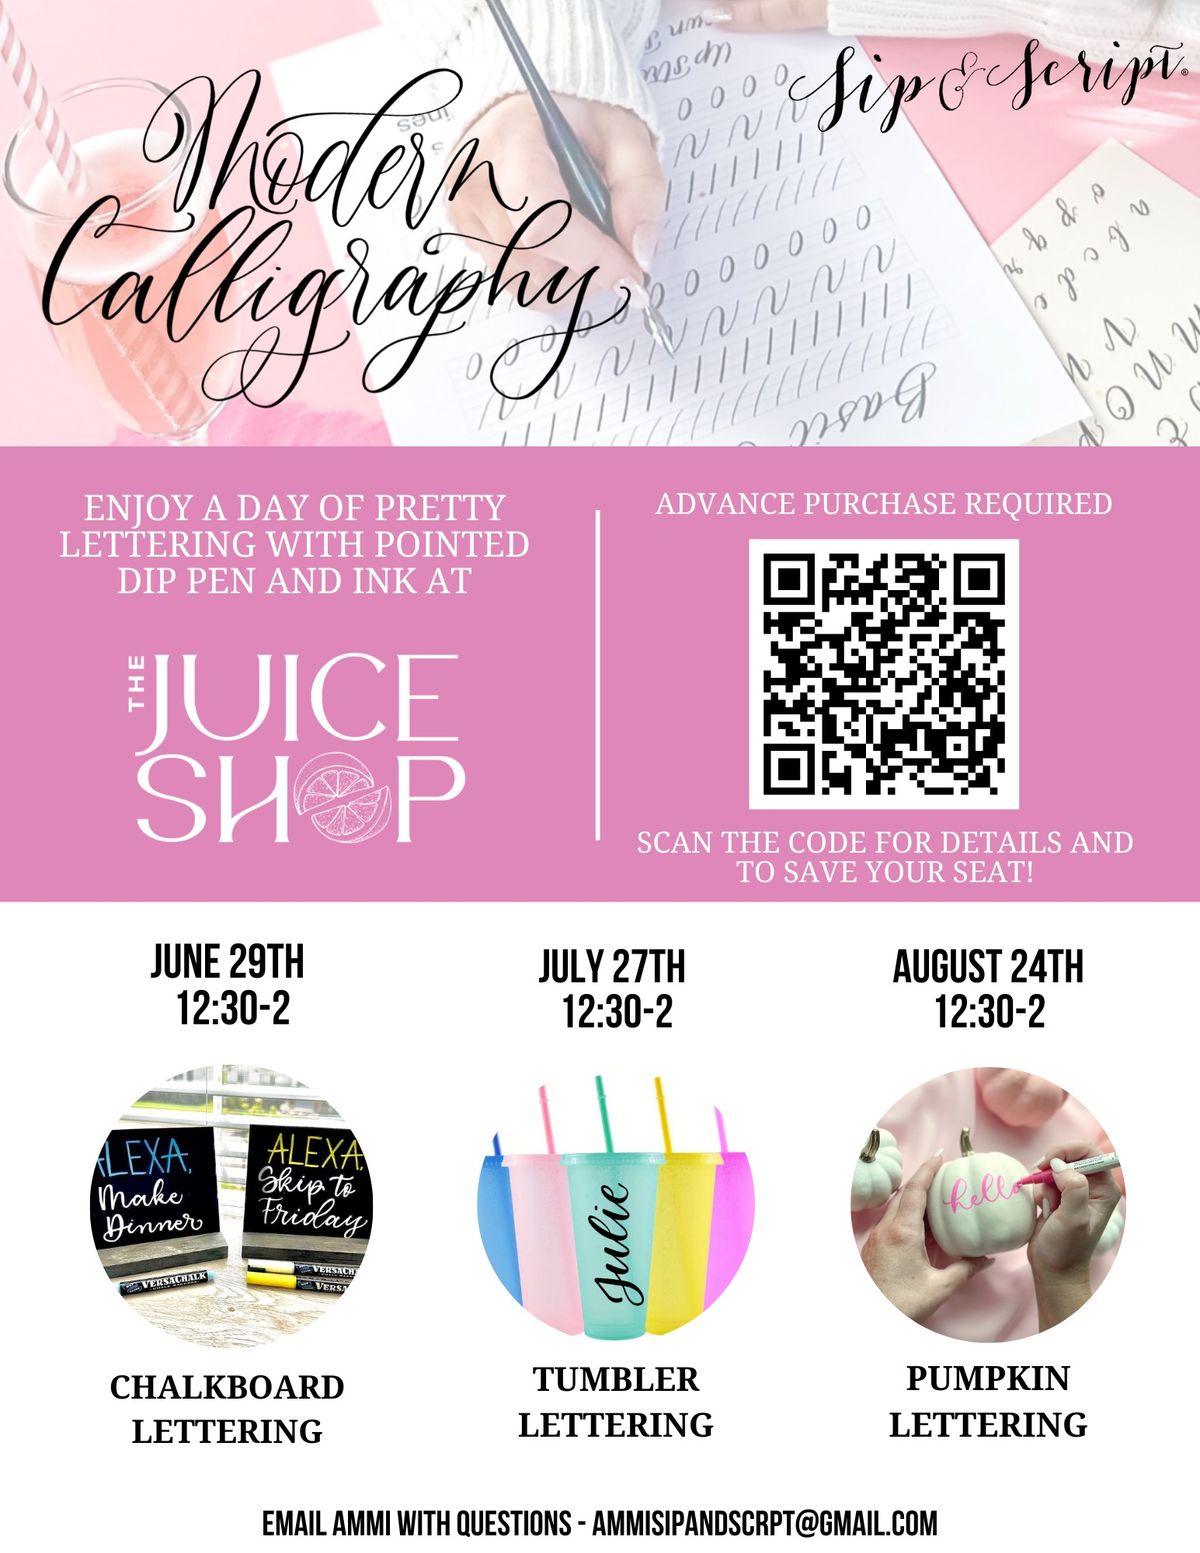 Modern Calligraphy for Beginners and Chalkboard Lettering @ The Juice Shop